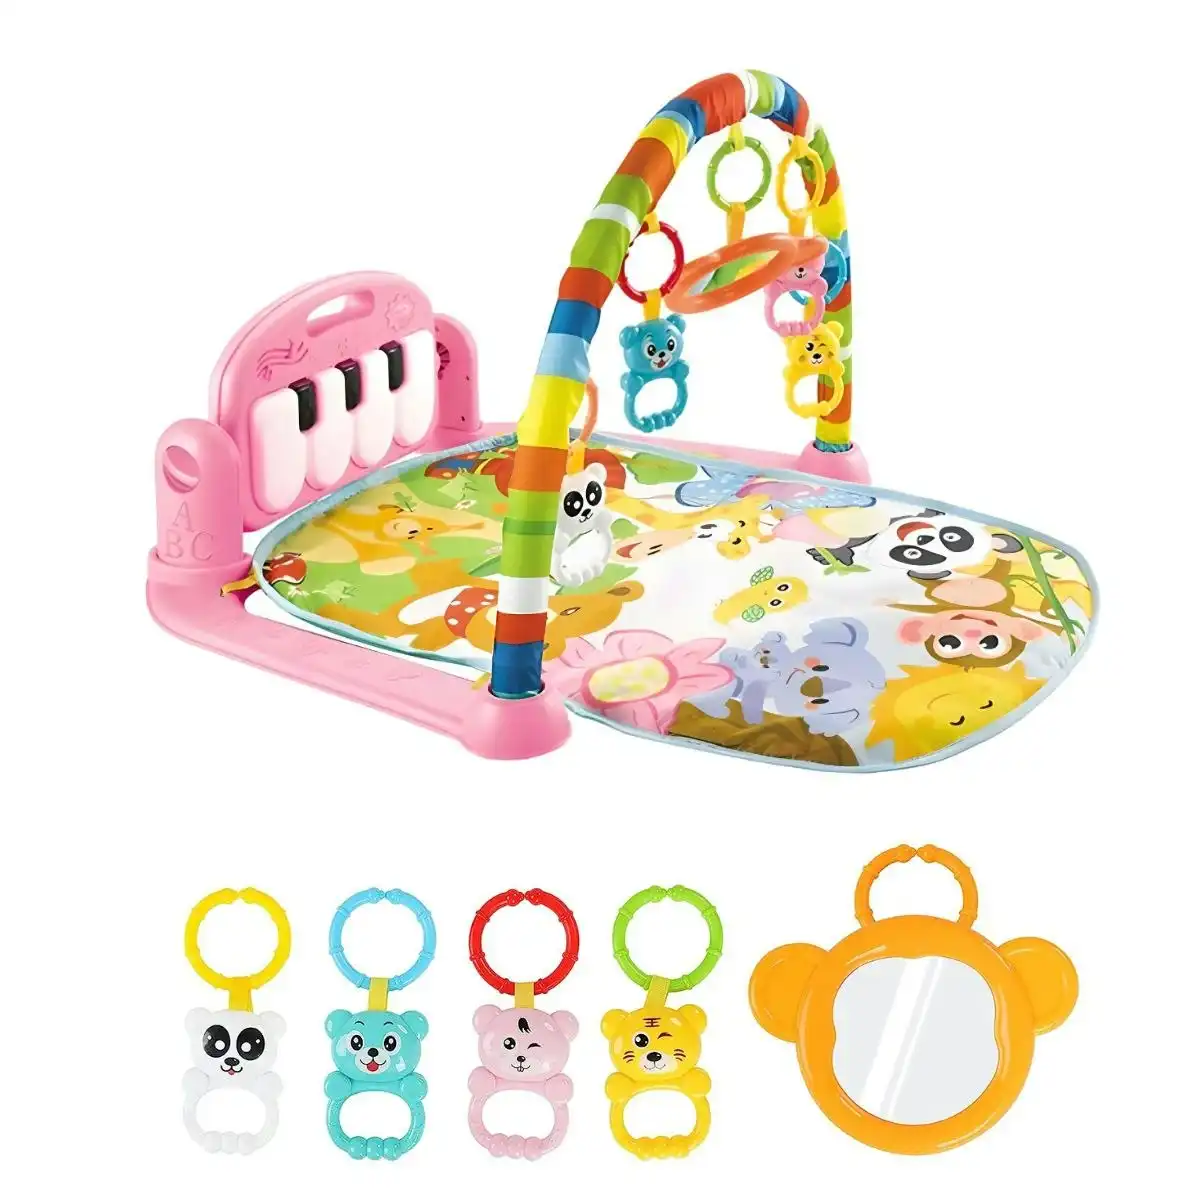 Toddly Kick'n'Play Pink Paradise Baby Activity Play Mat with Musical Light